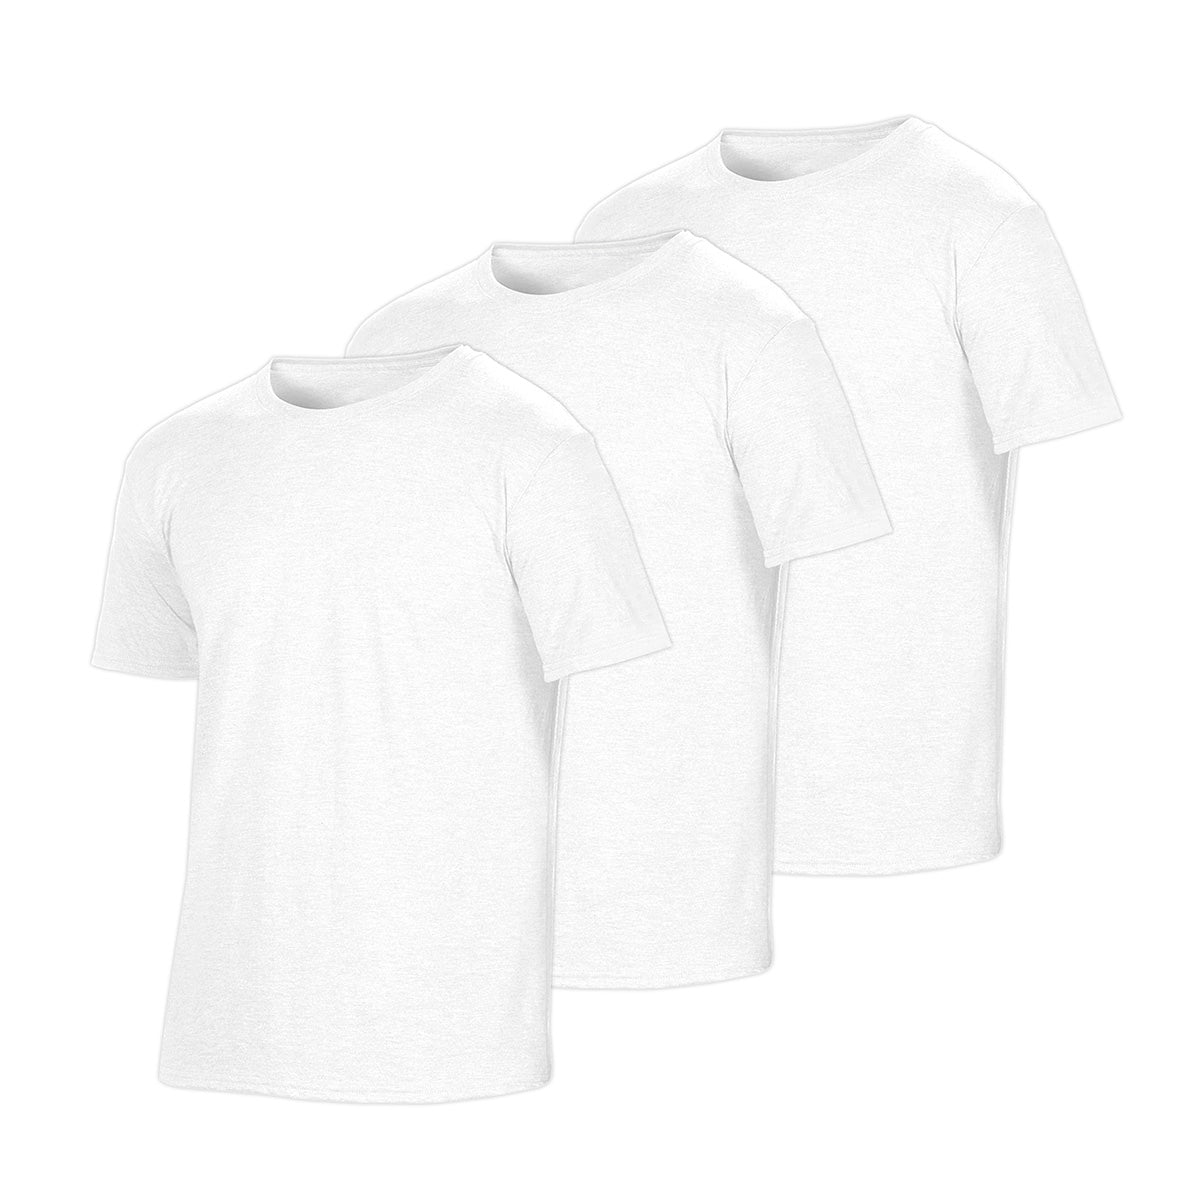 Crew Neck White Out 3-Pack